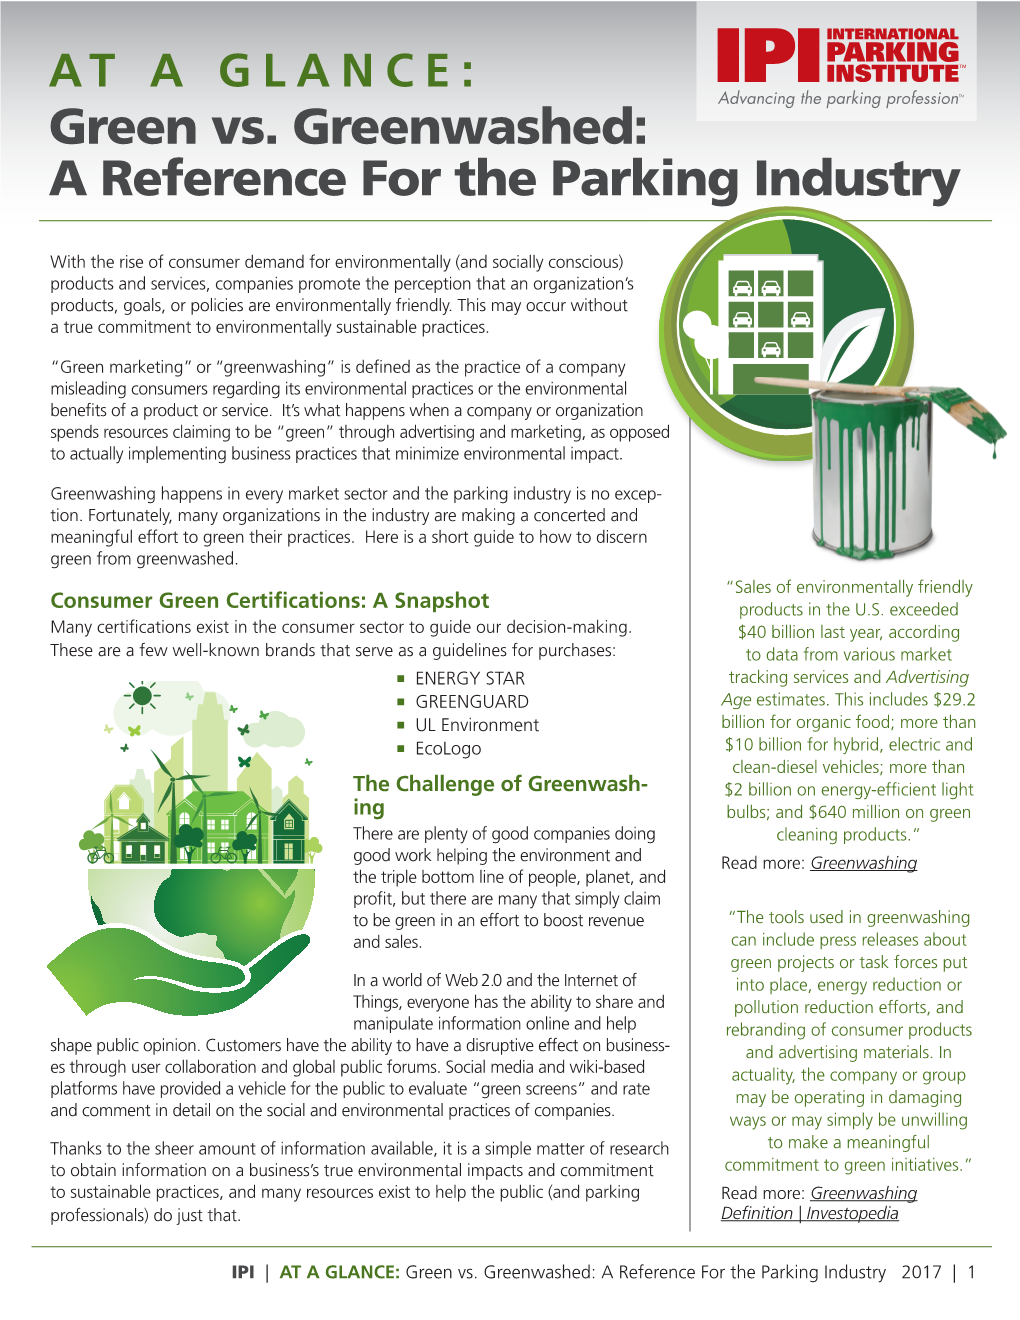 Green Vs. Greenwashed: a Reference for the Parking Industry